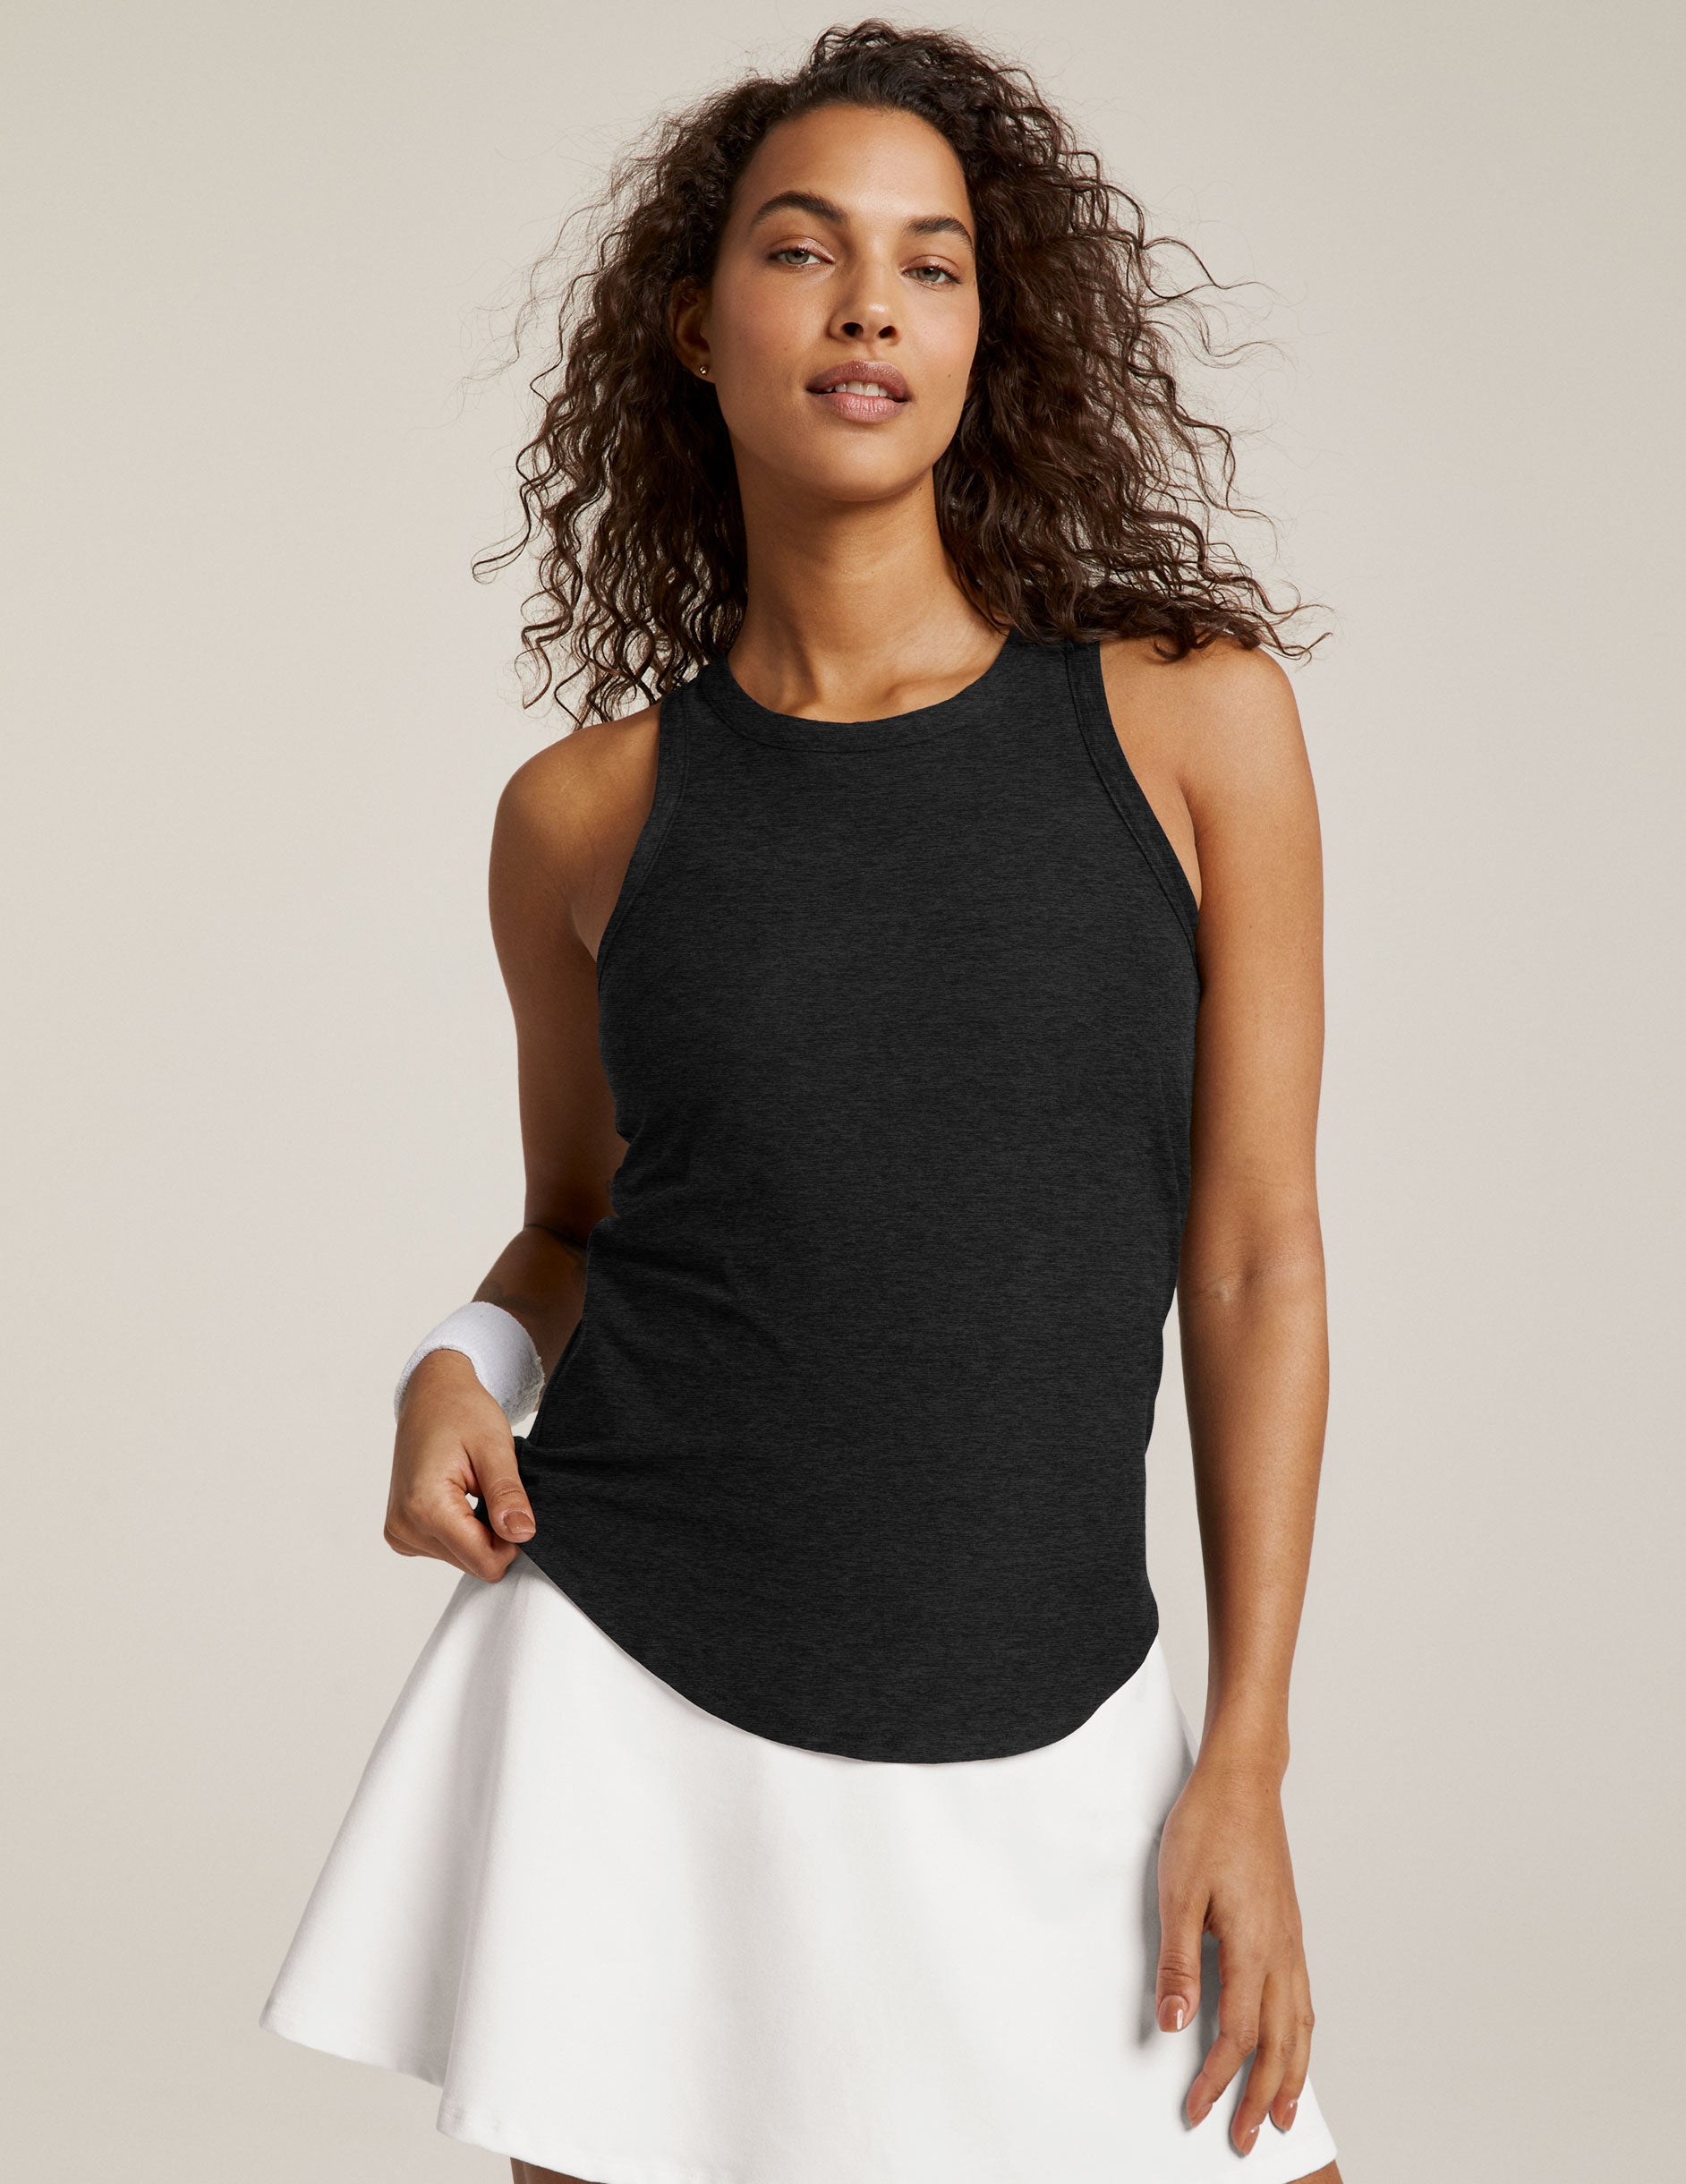 Featherweight Keep It Moving Tank